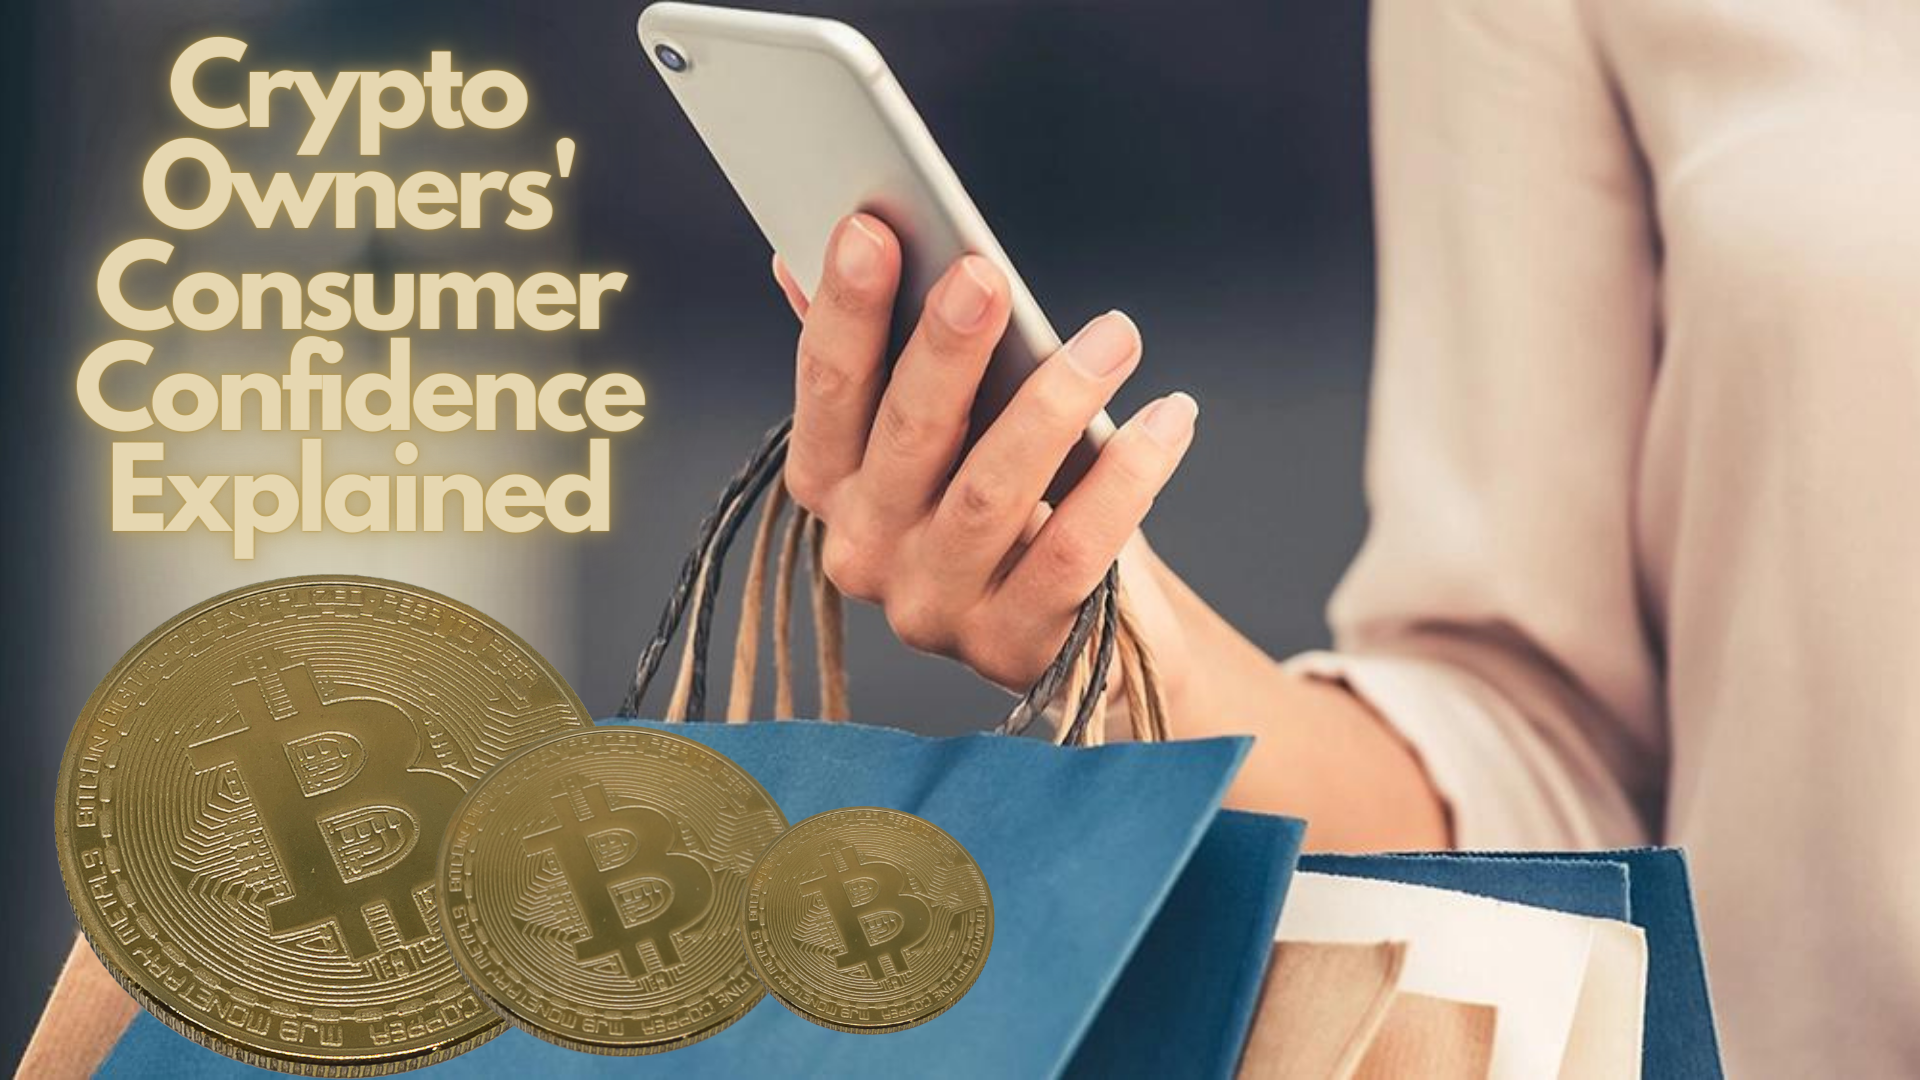 A woman holding shopping bags and a phone with gold bitcoins at the bottom left